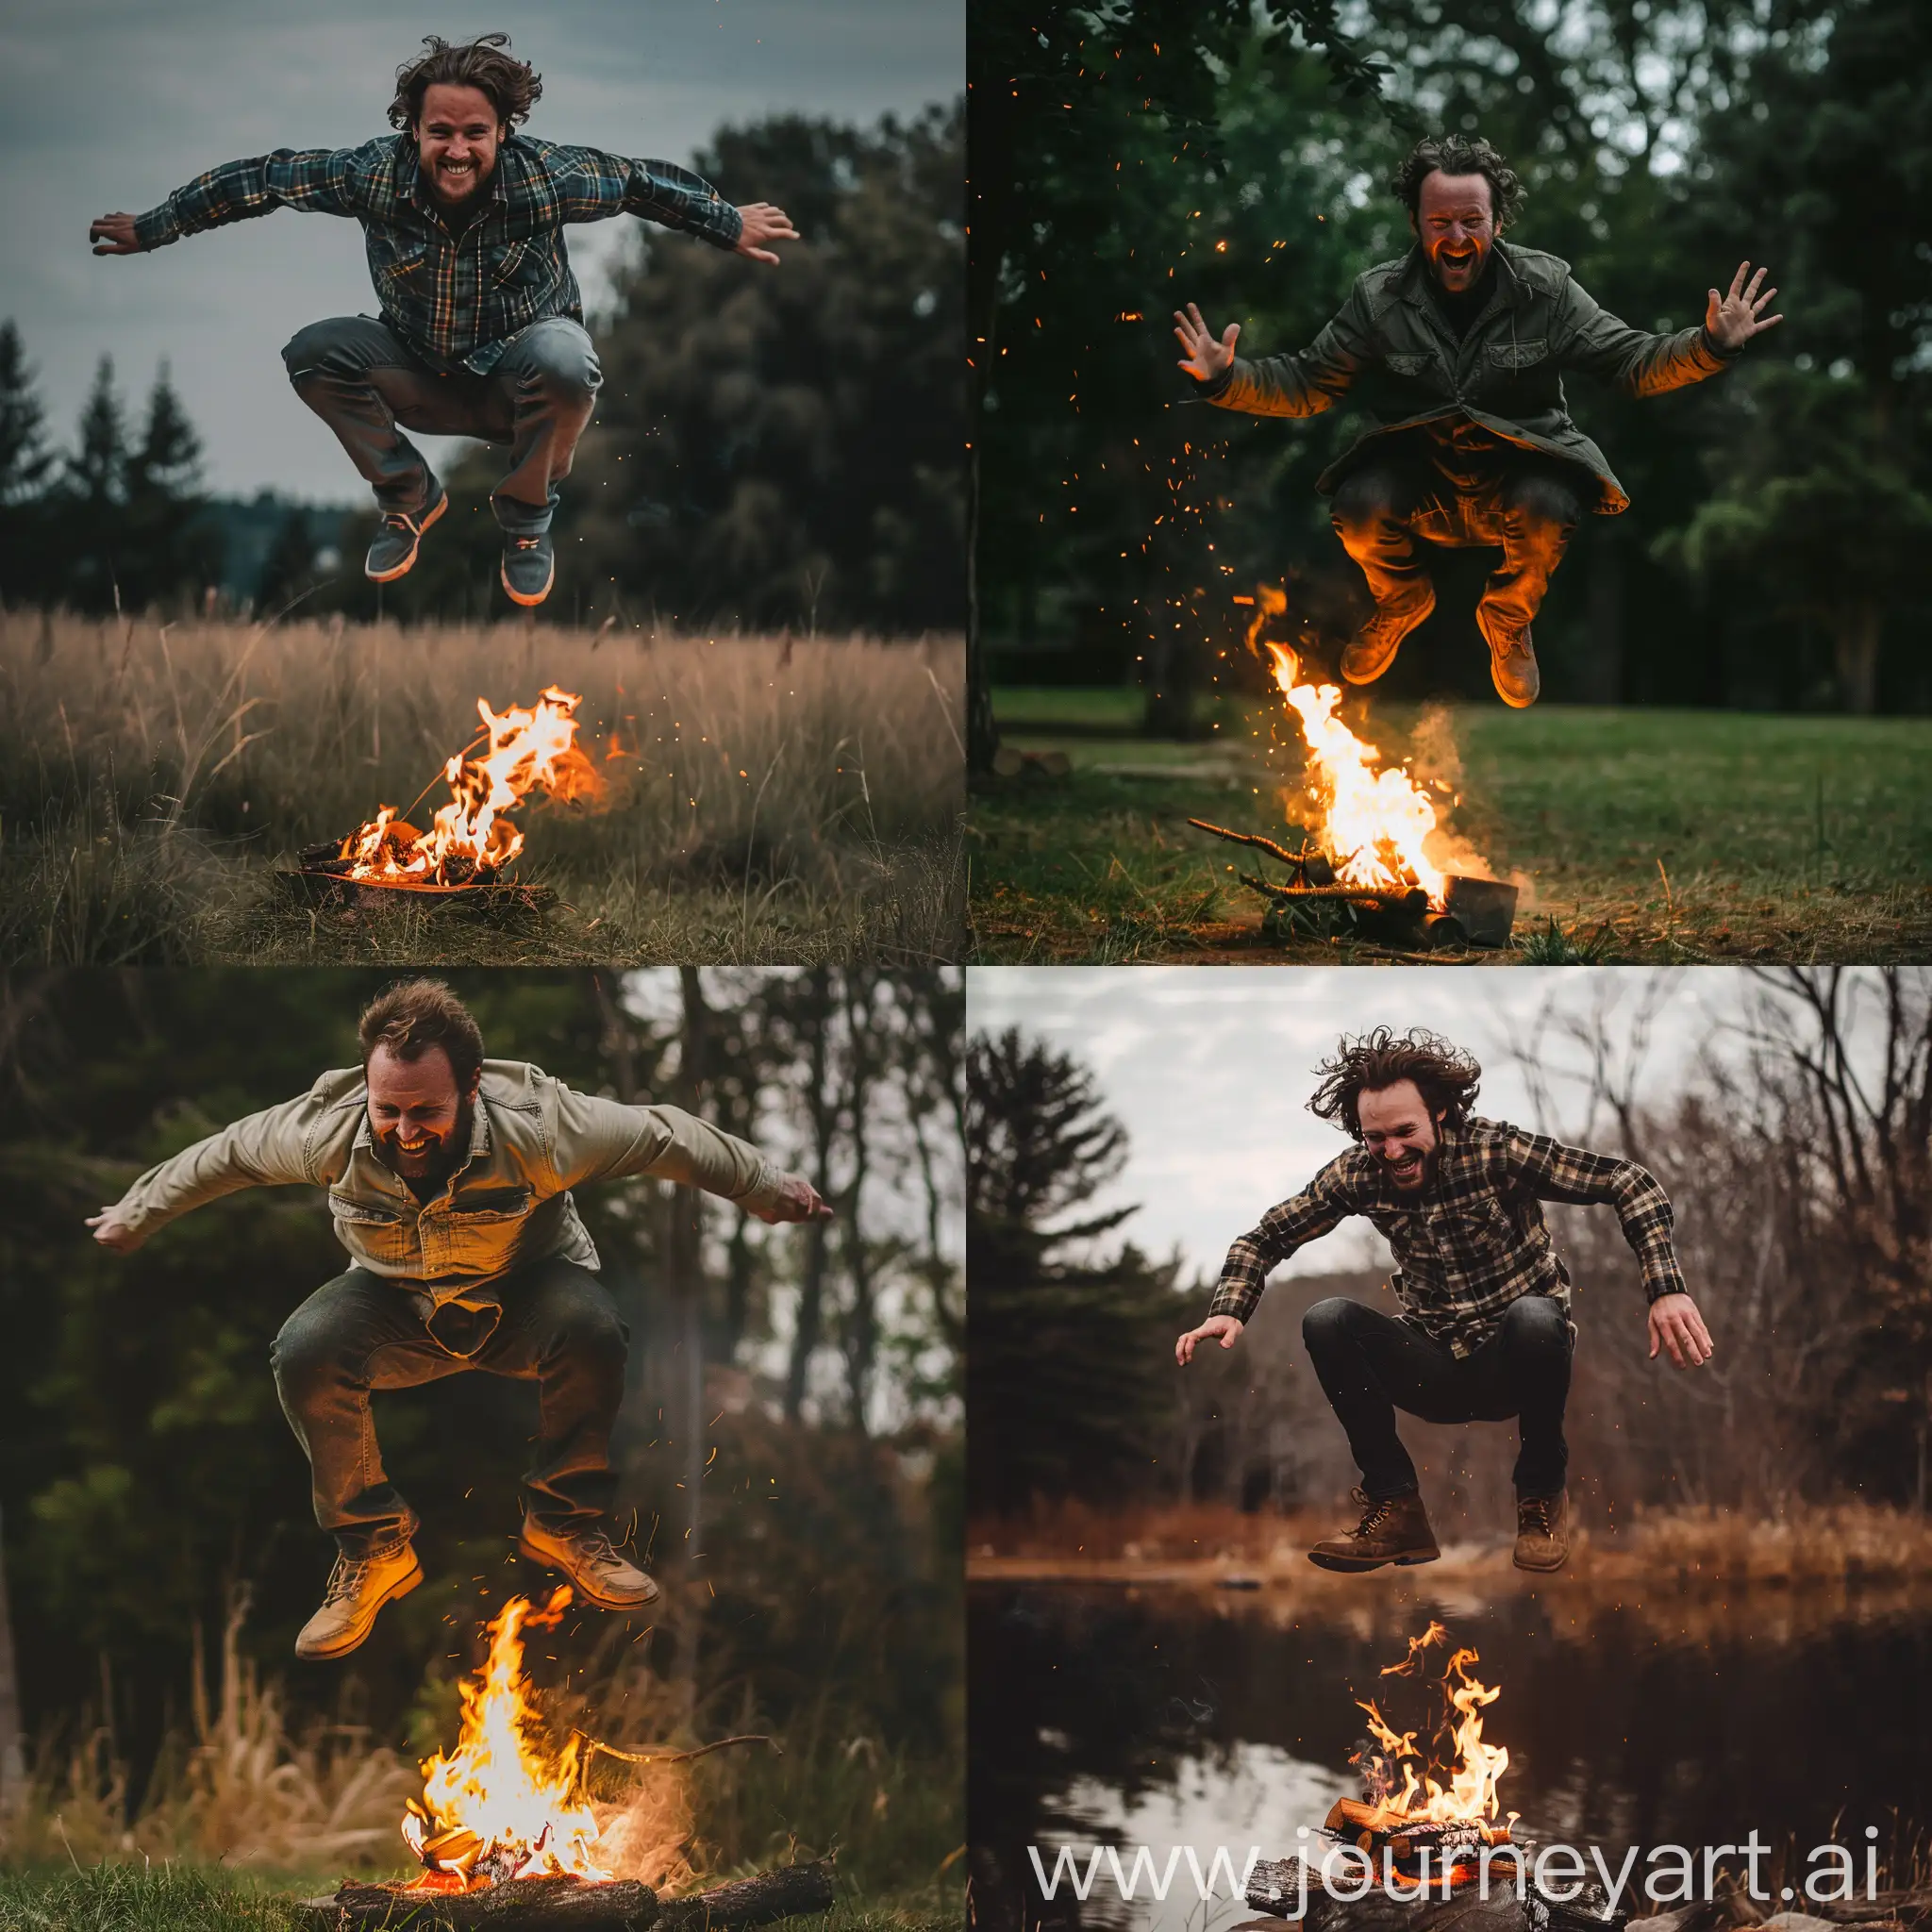 Real and natural photo of a handsome man jumping over a small fire and smiling